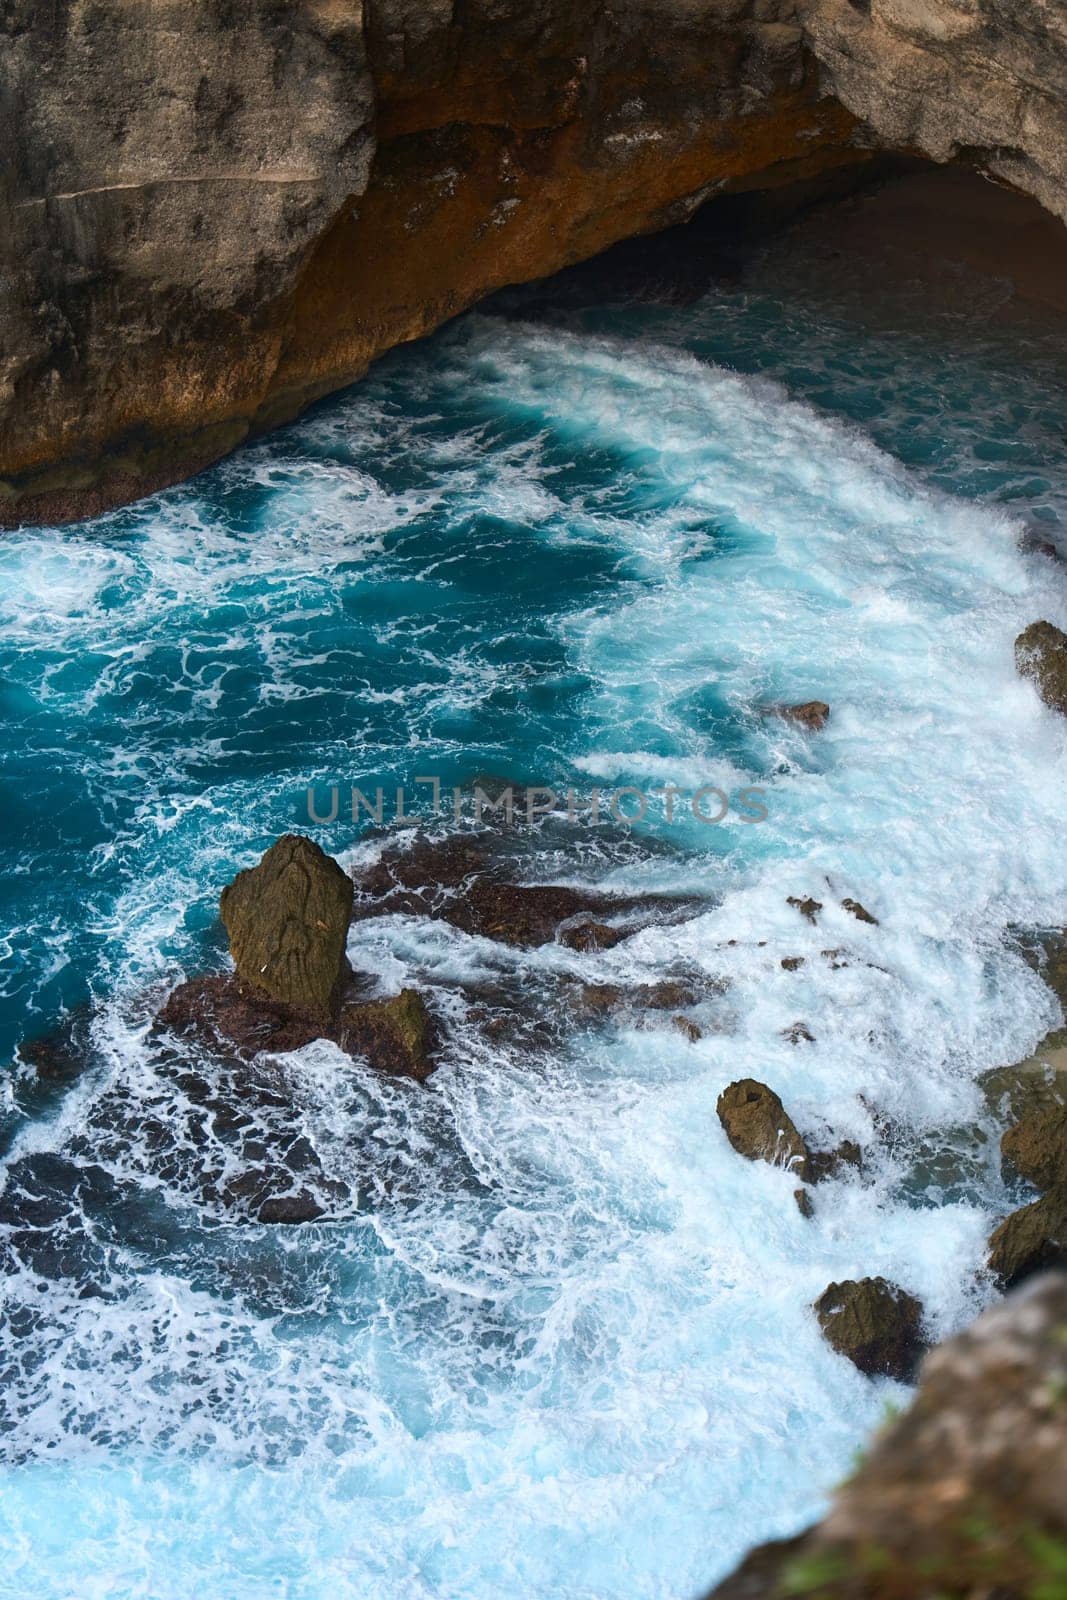 Cinematic aerial landscape shots of the beautiful island of Nusa Penida. Huge cliffs by the shoreline and hidden dream beaches with clear water and foaming wave